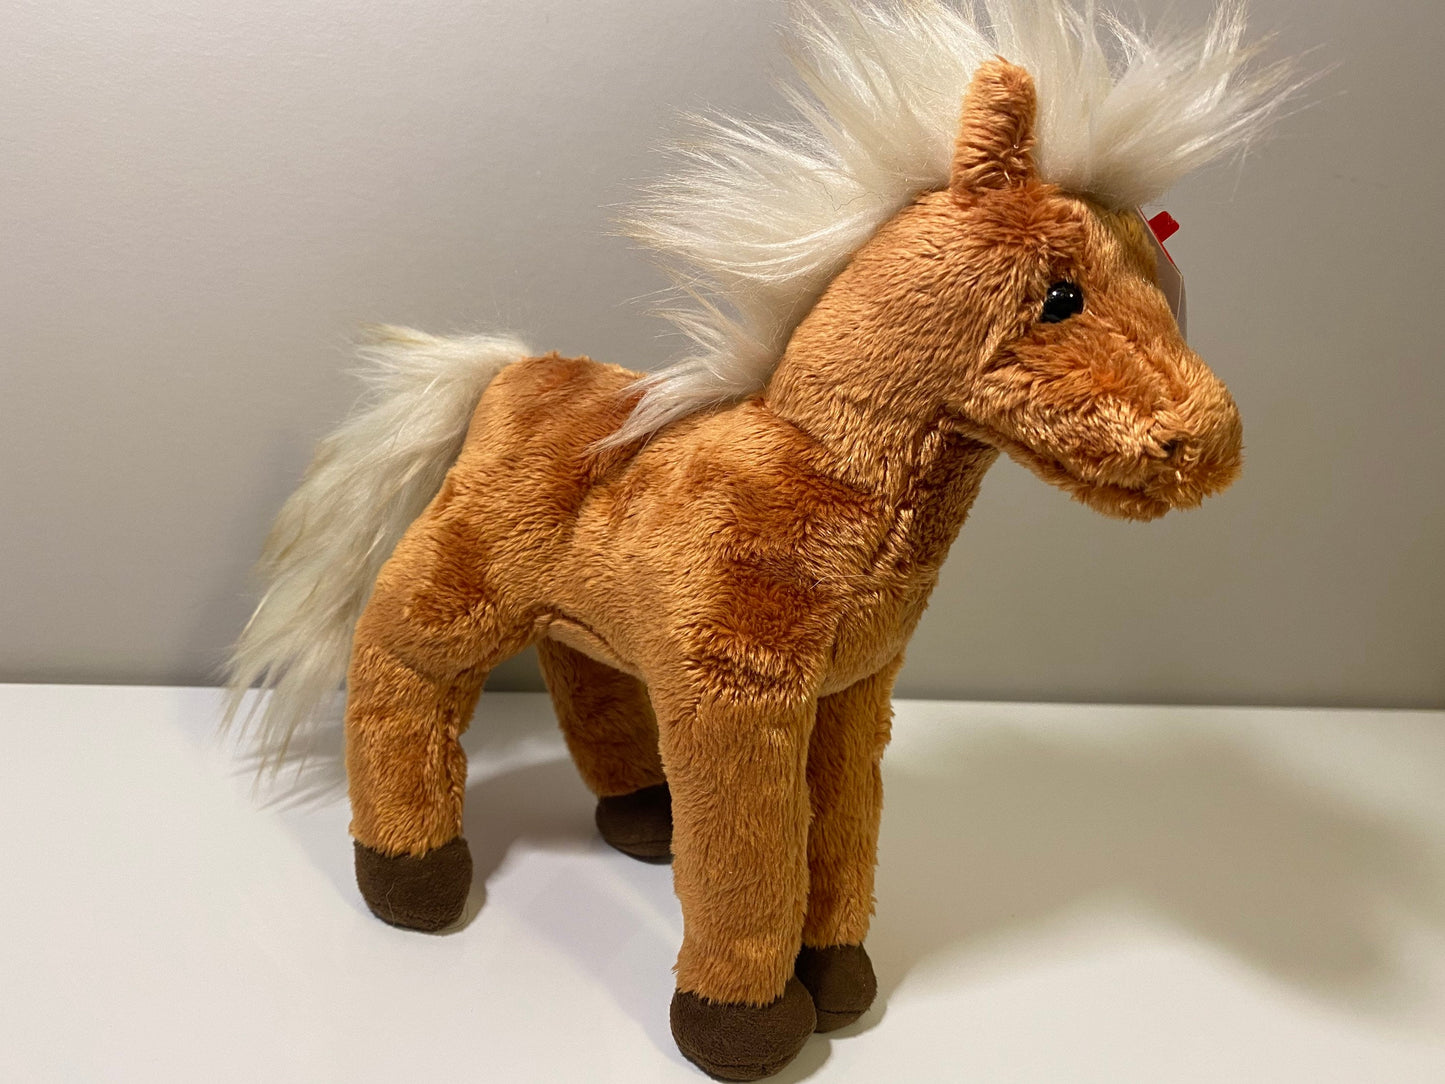 Ty Beanie Baby “Spurs” the Horse (6.5 inch)